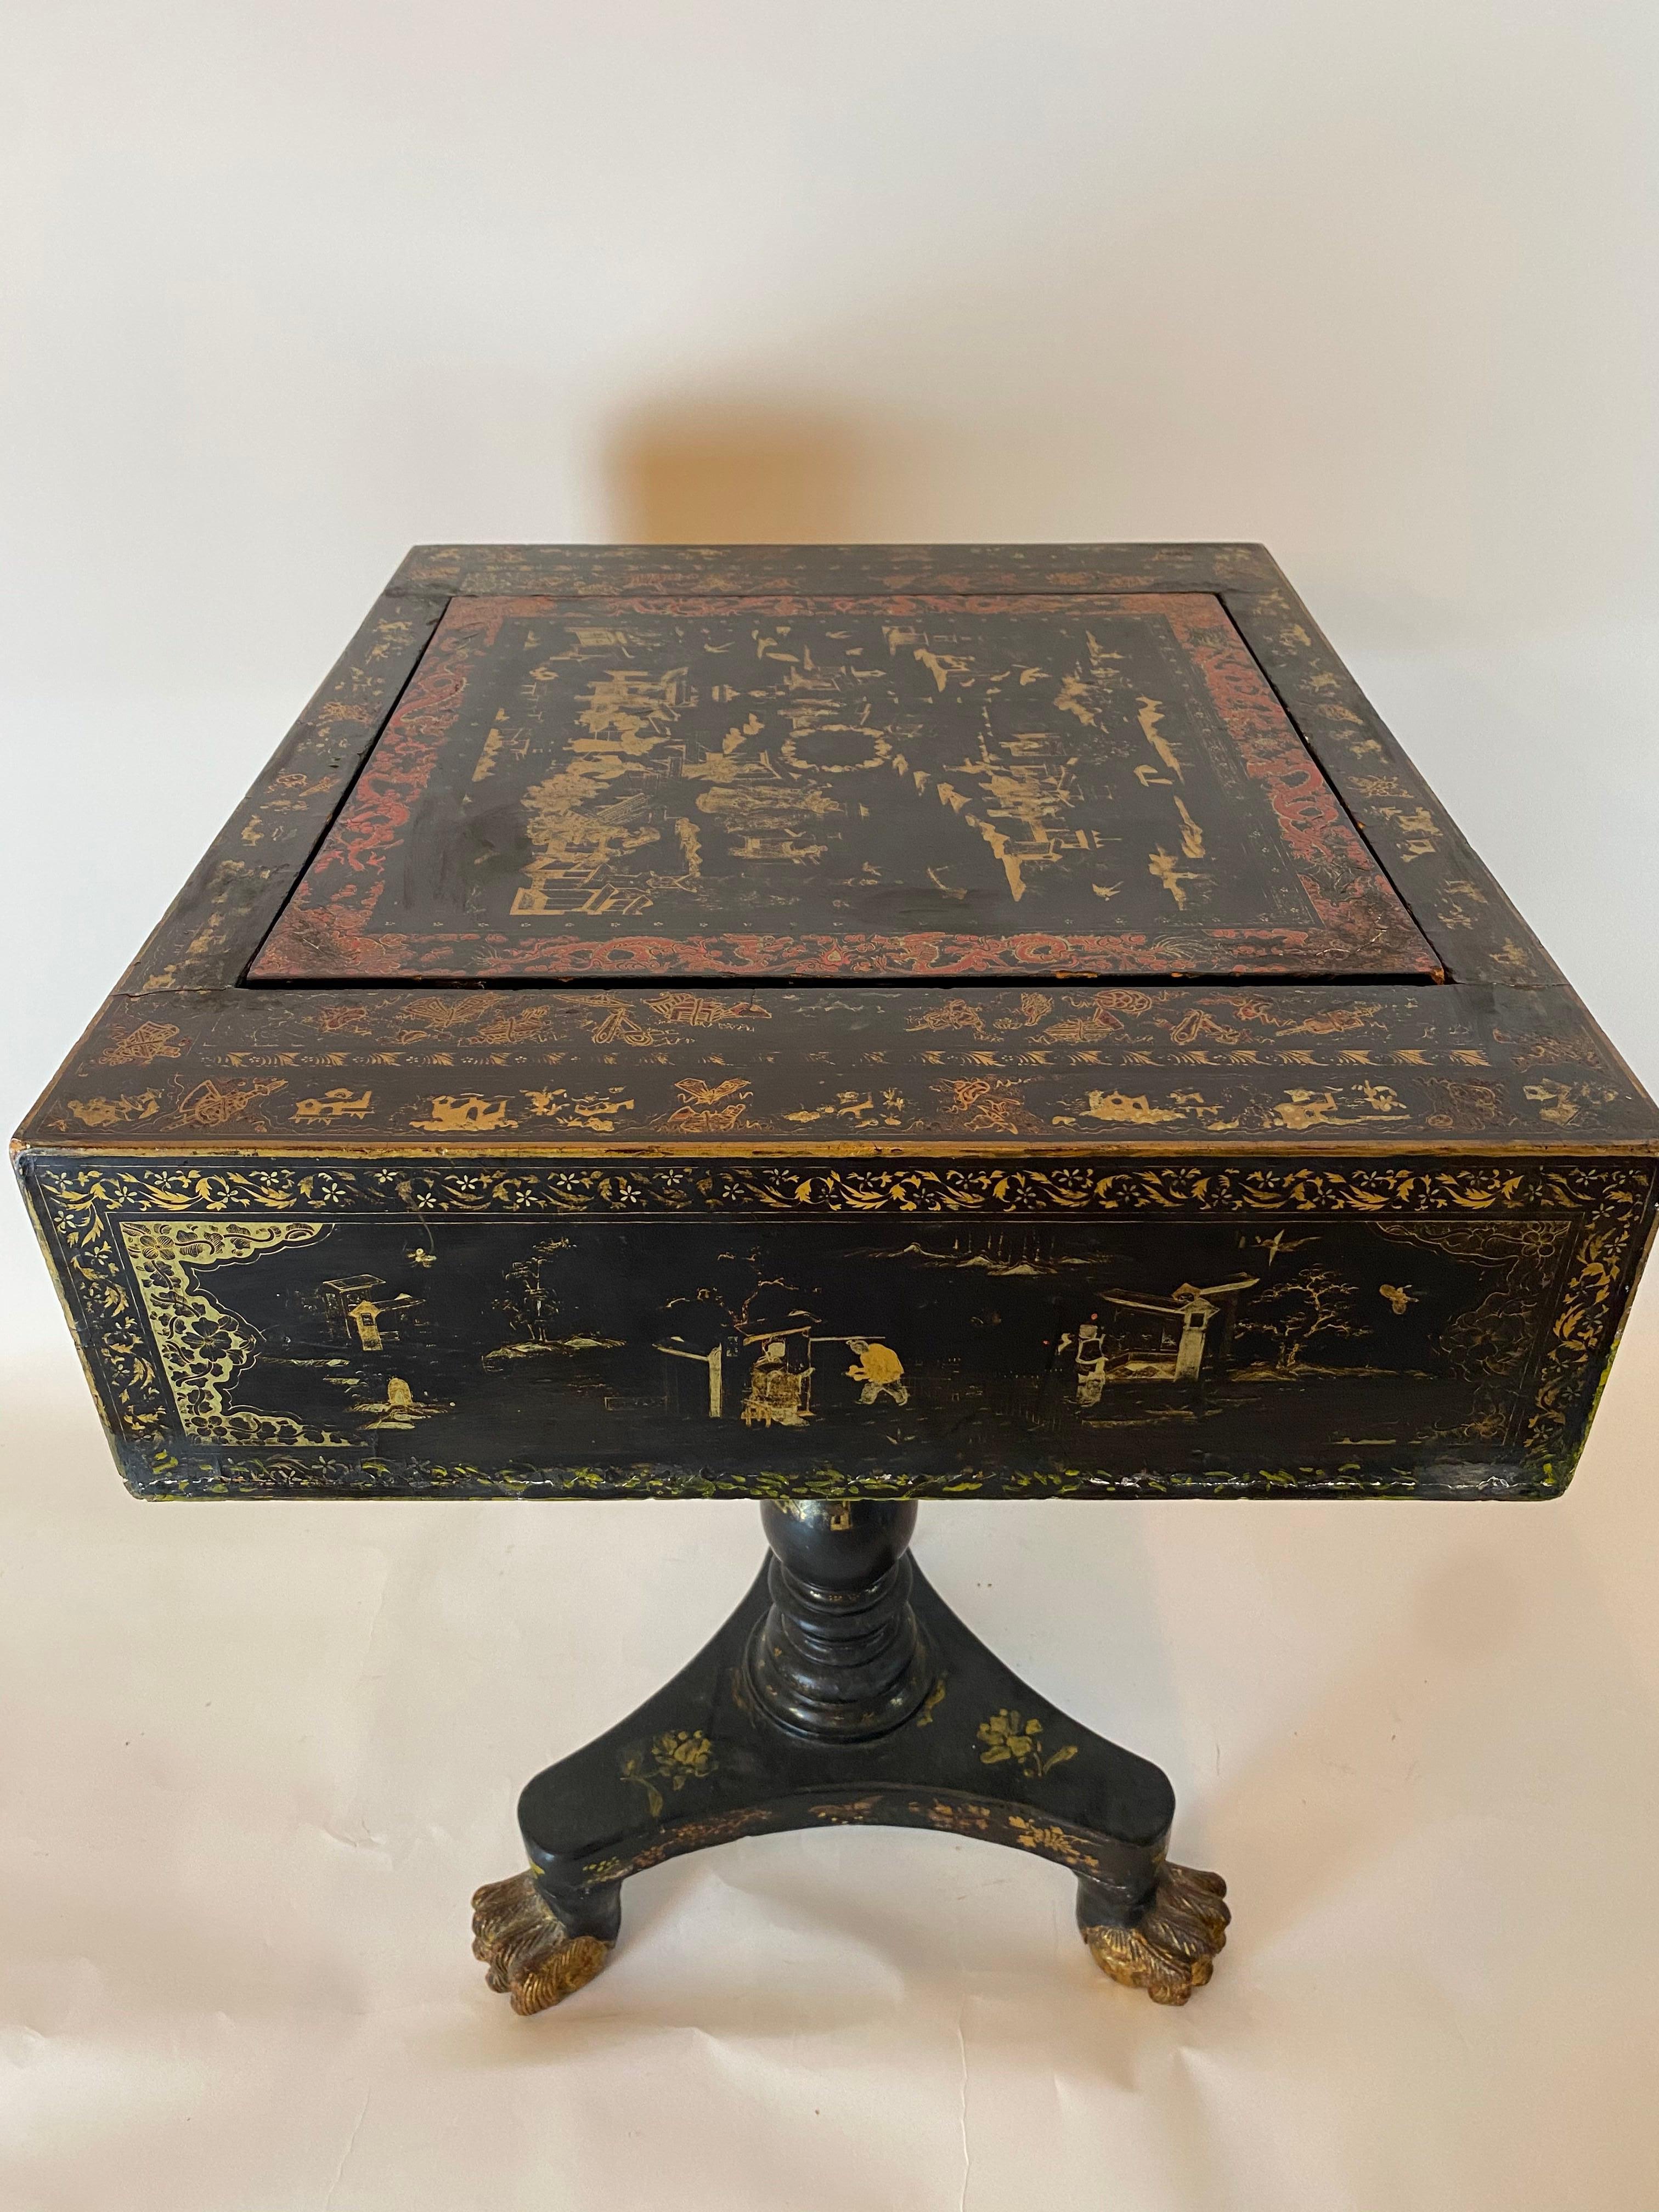 Hand-Painted Antique 18th Century Export Chinese Lacquer Gaming Table